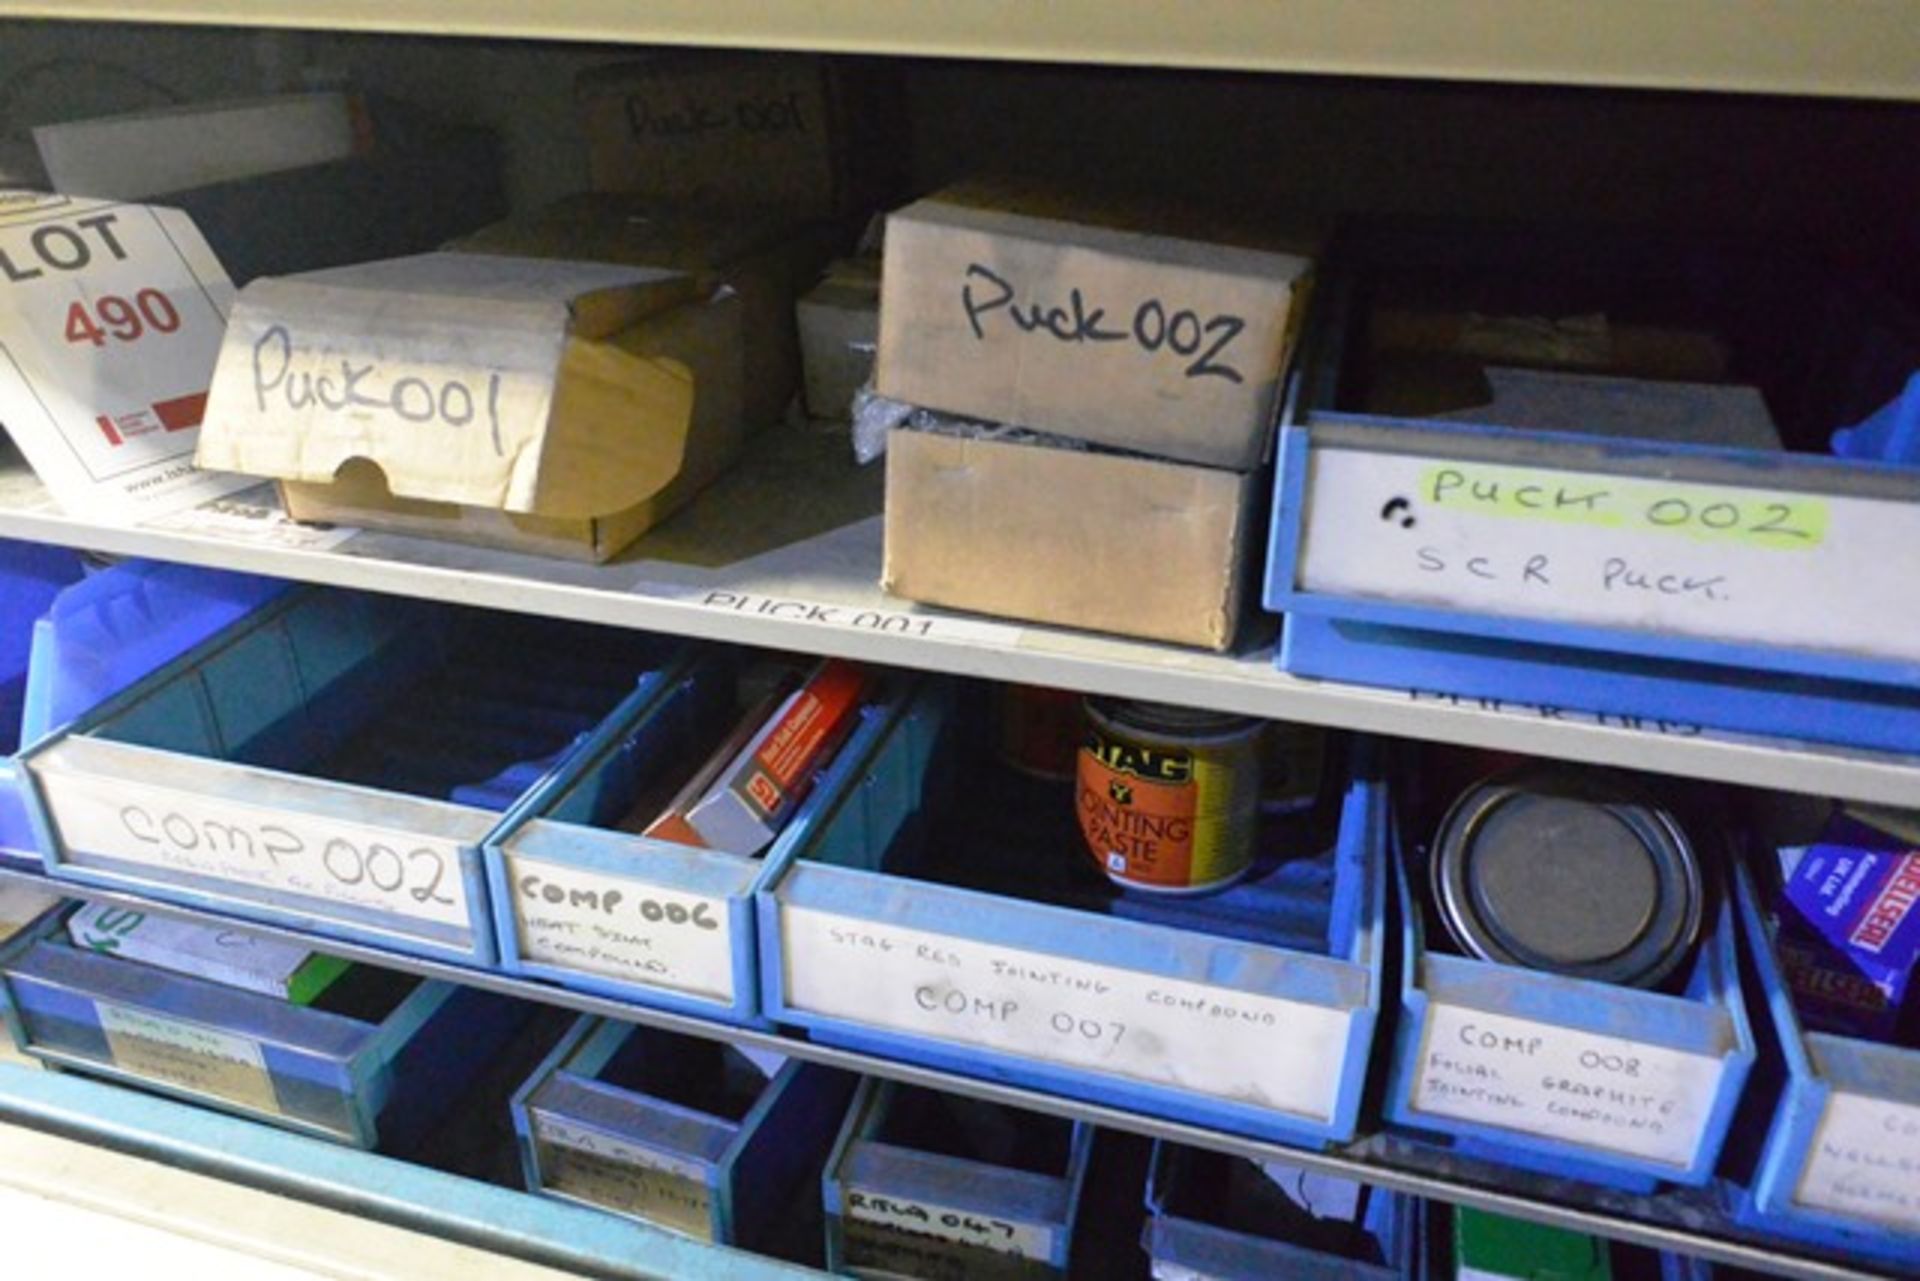 Contents of shelf no. 5 to include various plastic and joisting compounds, SCR pucks, staples, - Image 2 of 4